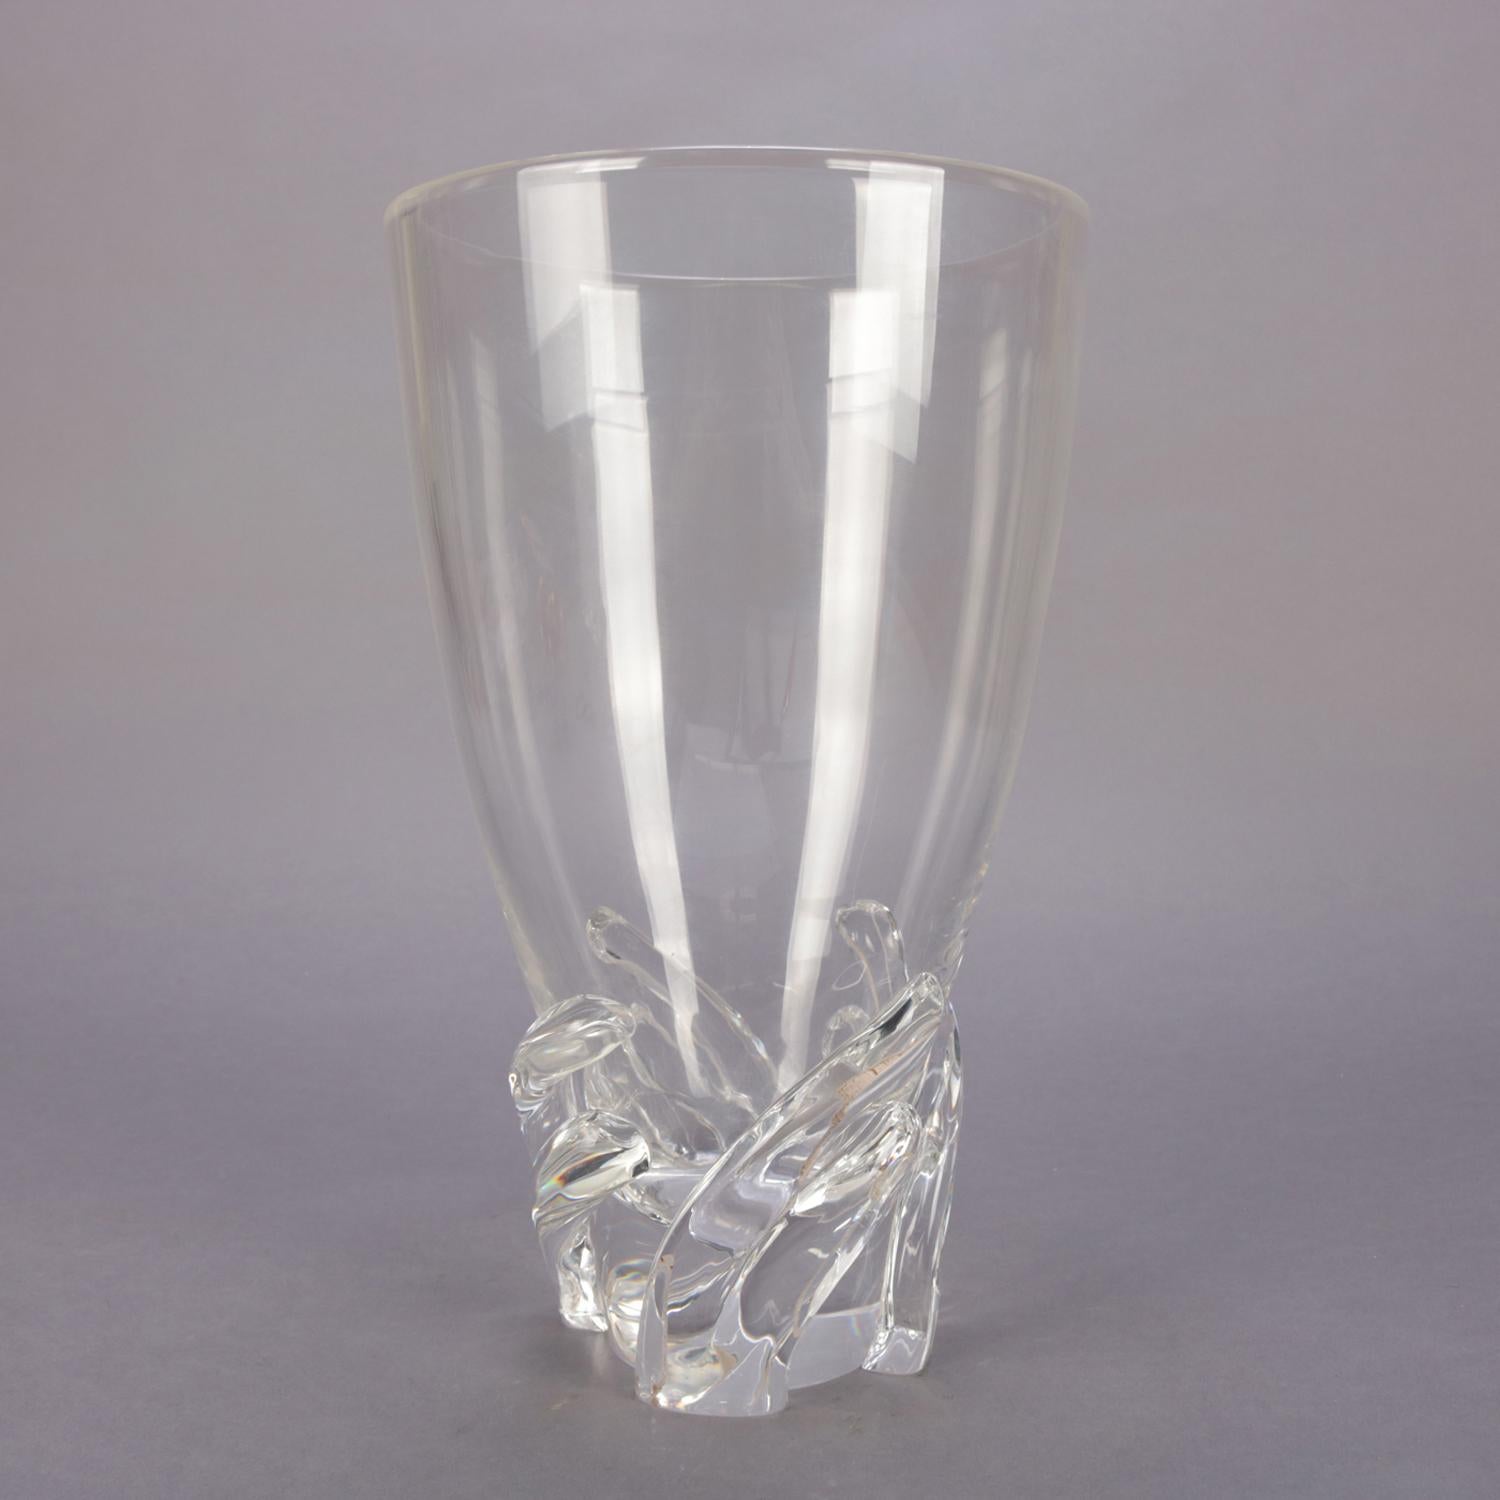 A large Steuben art glass Phoenix crystal vase features tapered conical form over swirled base, signed on base, 20th century

Measures: 13.75